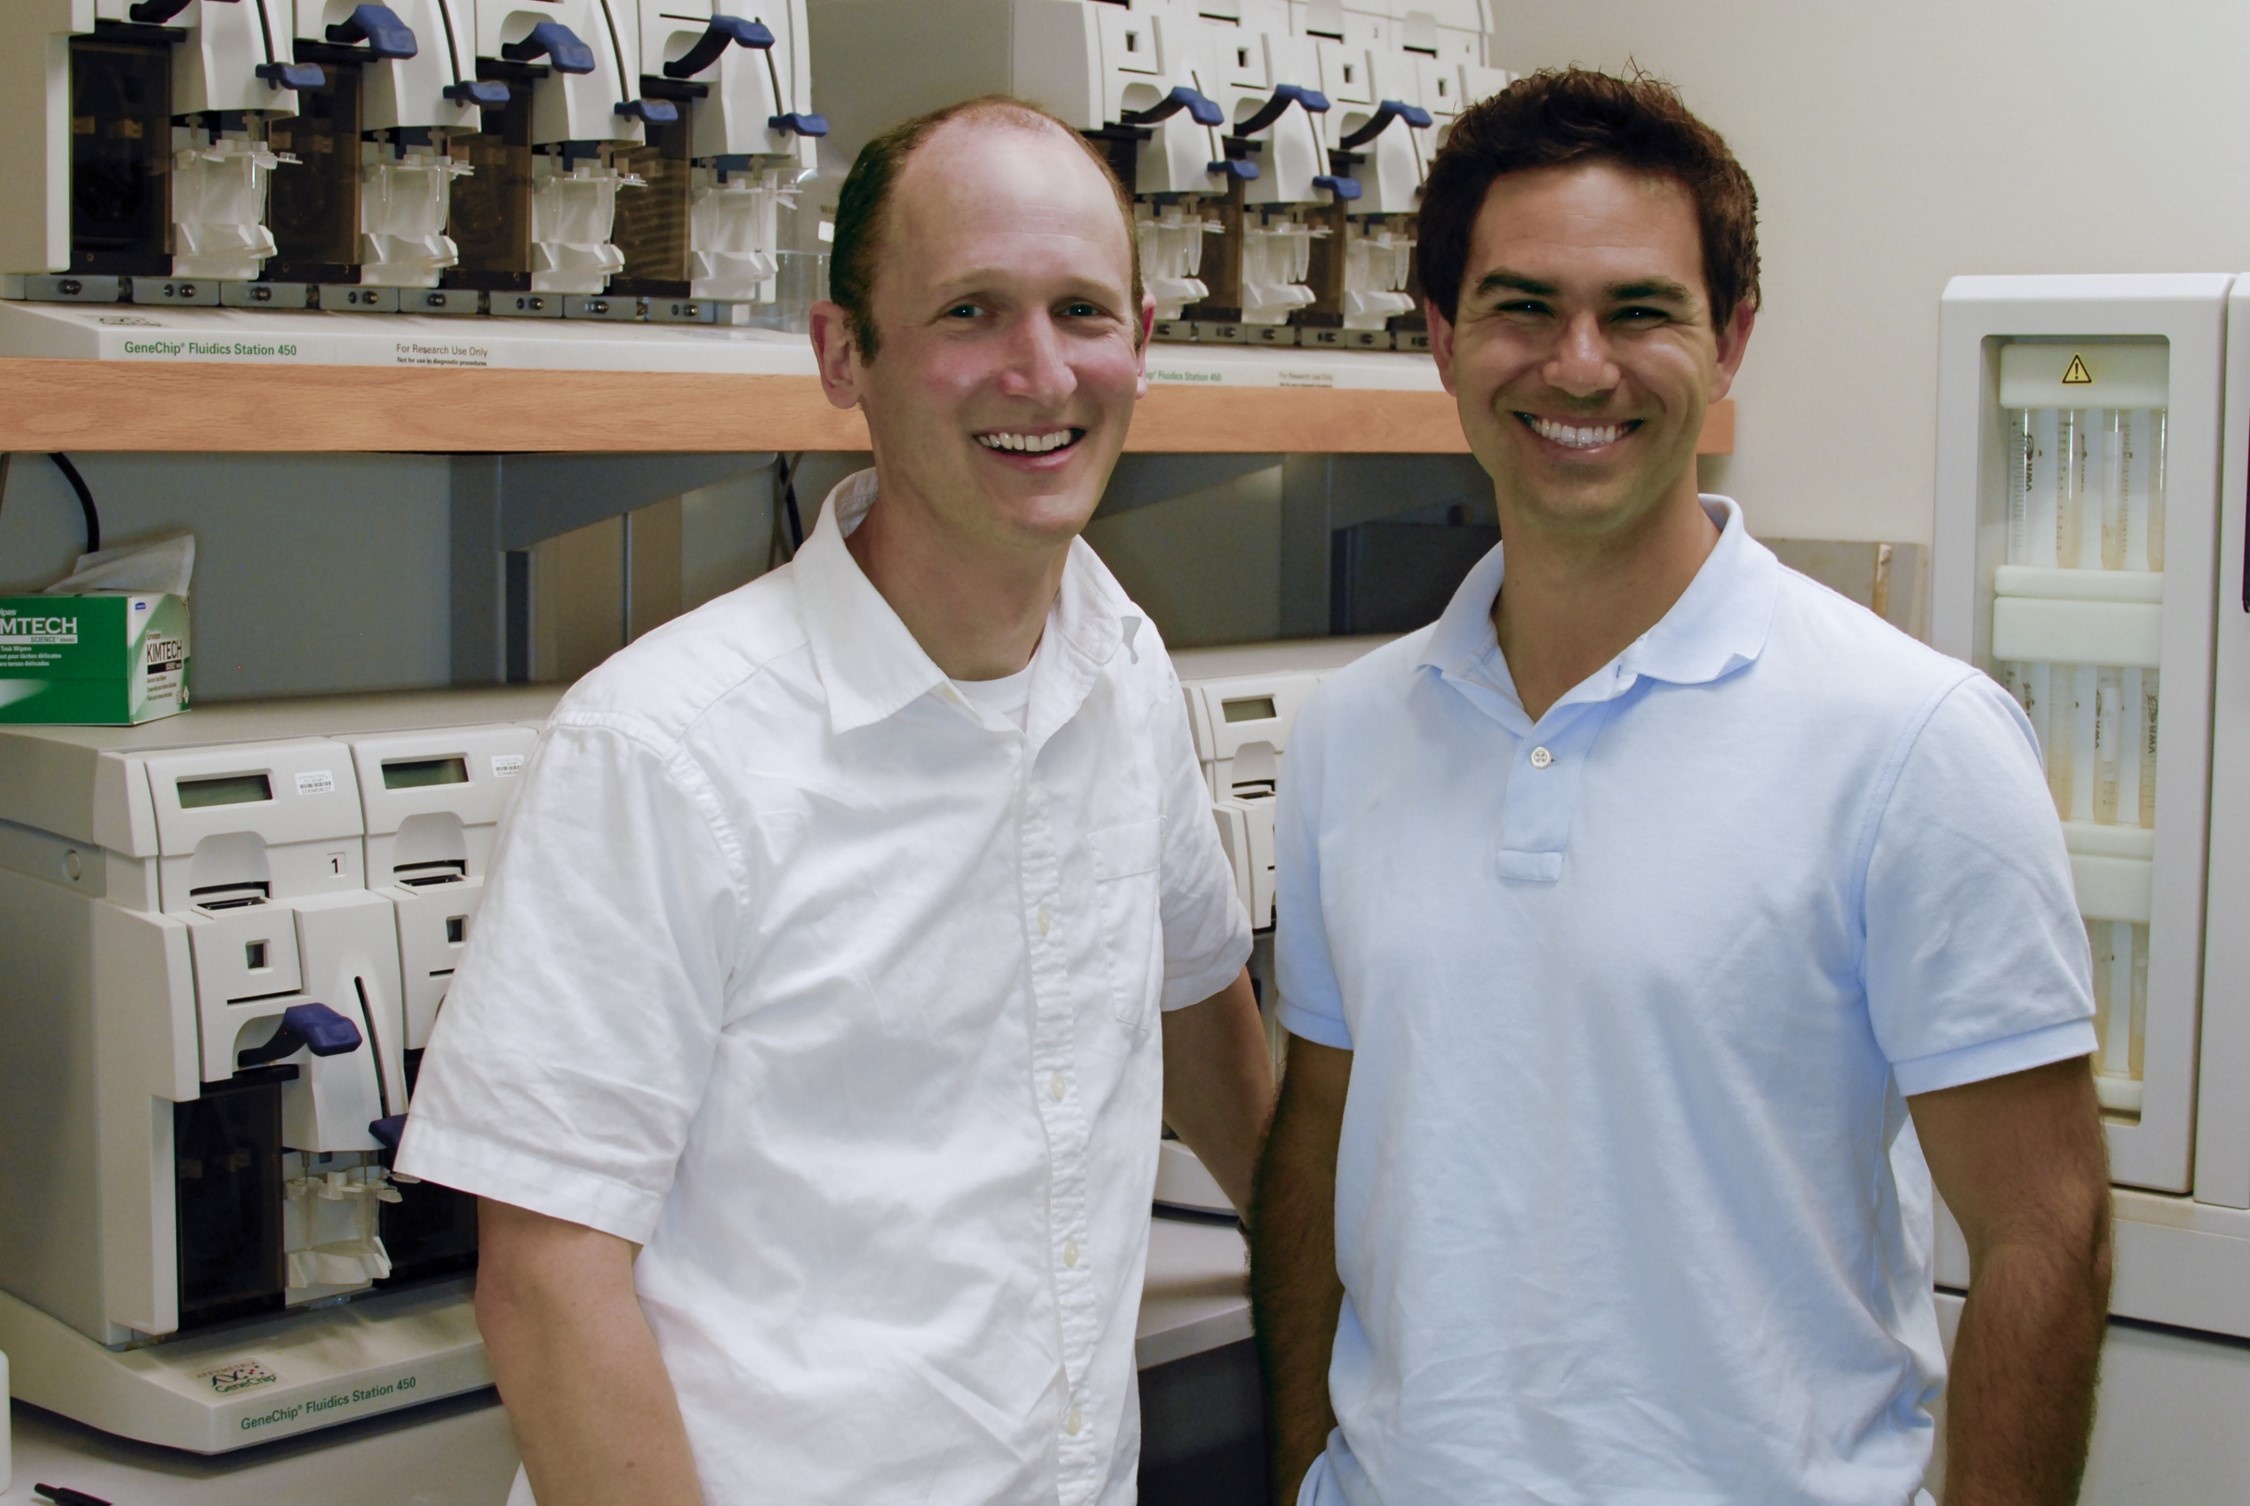 Andrew M. Radin MBA ’14 (right) and twoXAR business partner Andrew A. Radin